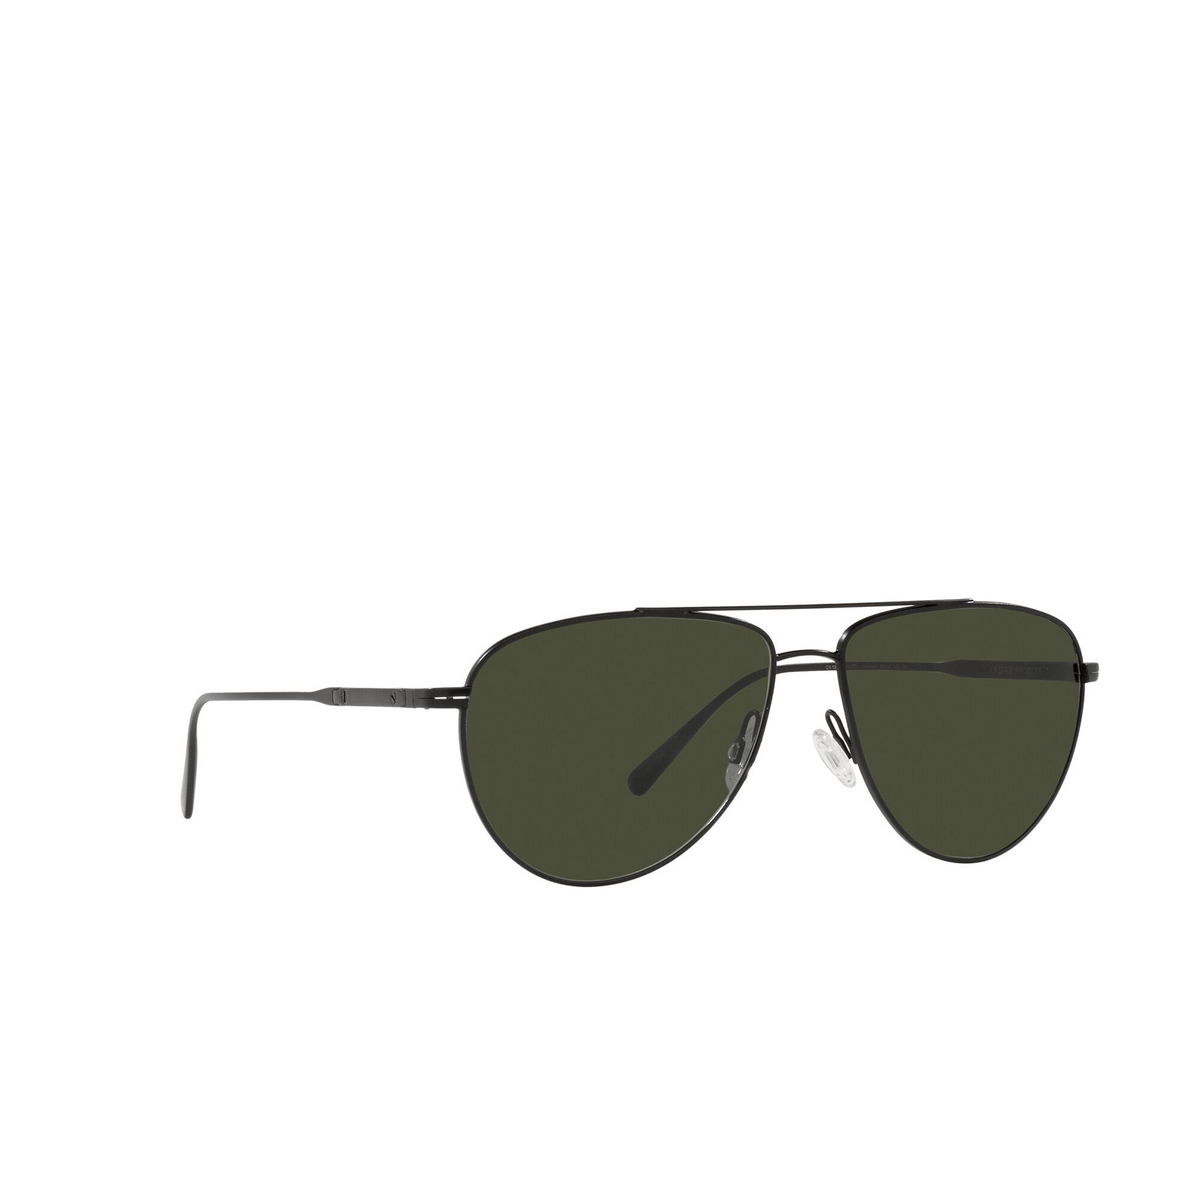 Oliver Peoples DISORIANO Sunglasses 506252 Matte Black - three-quarters view